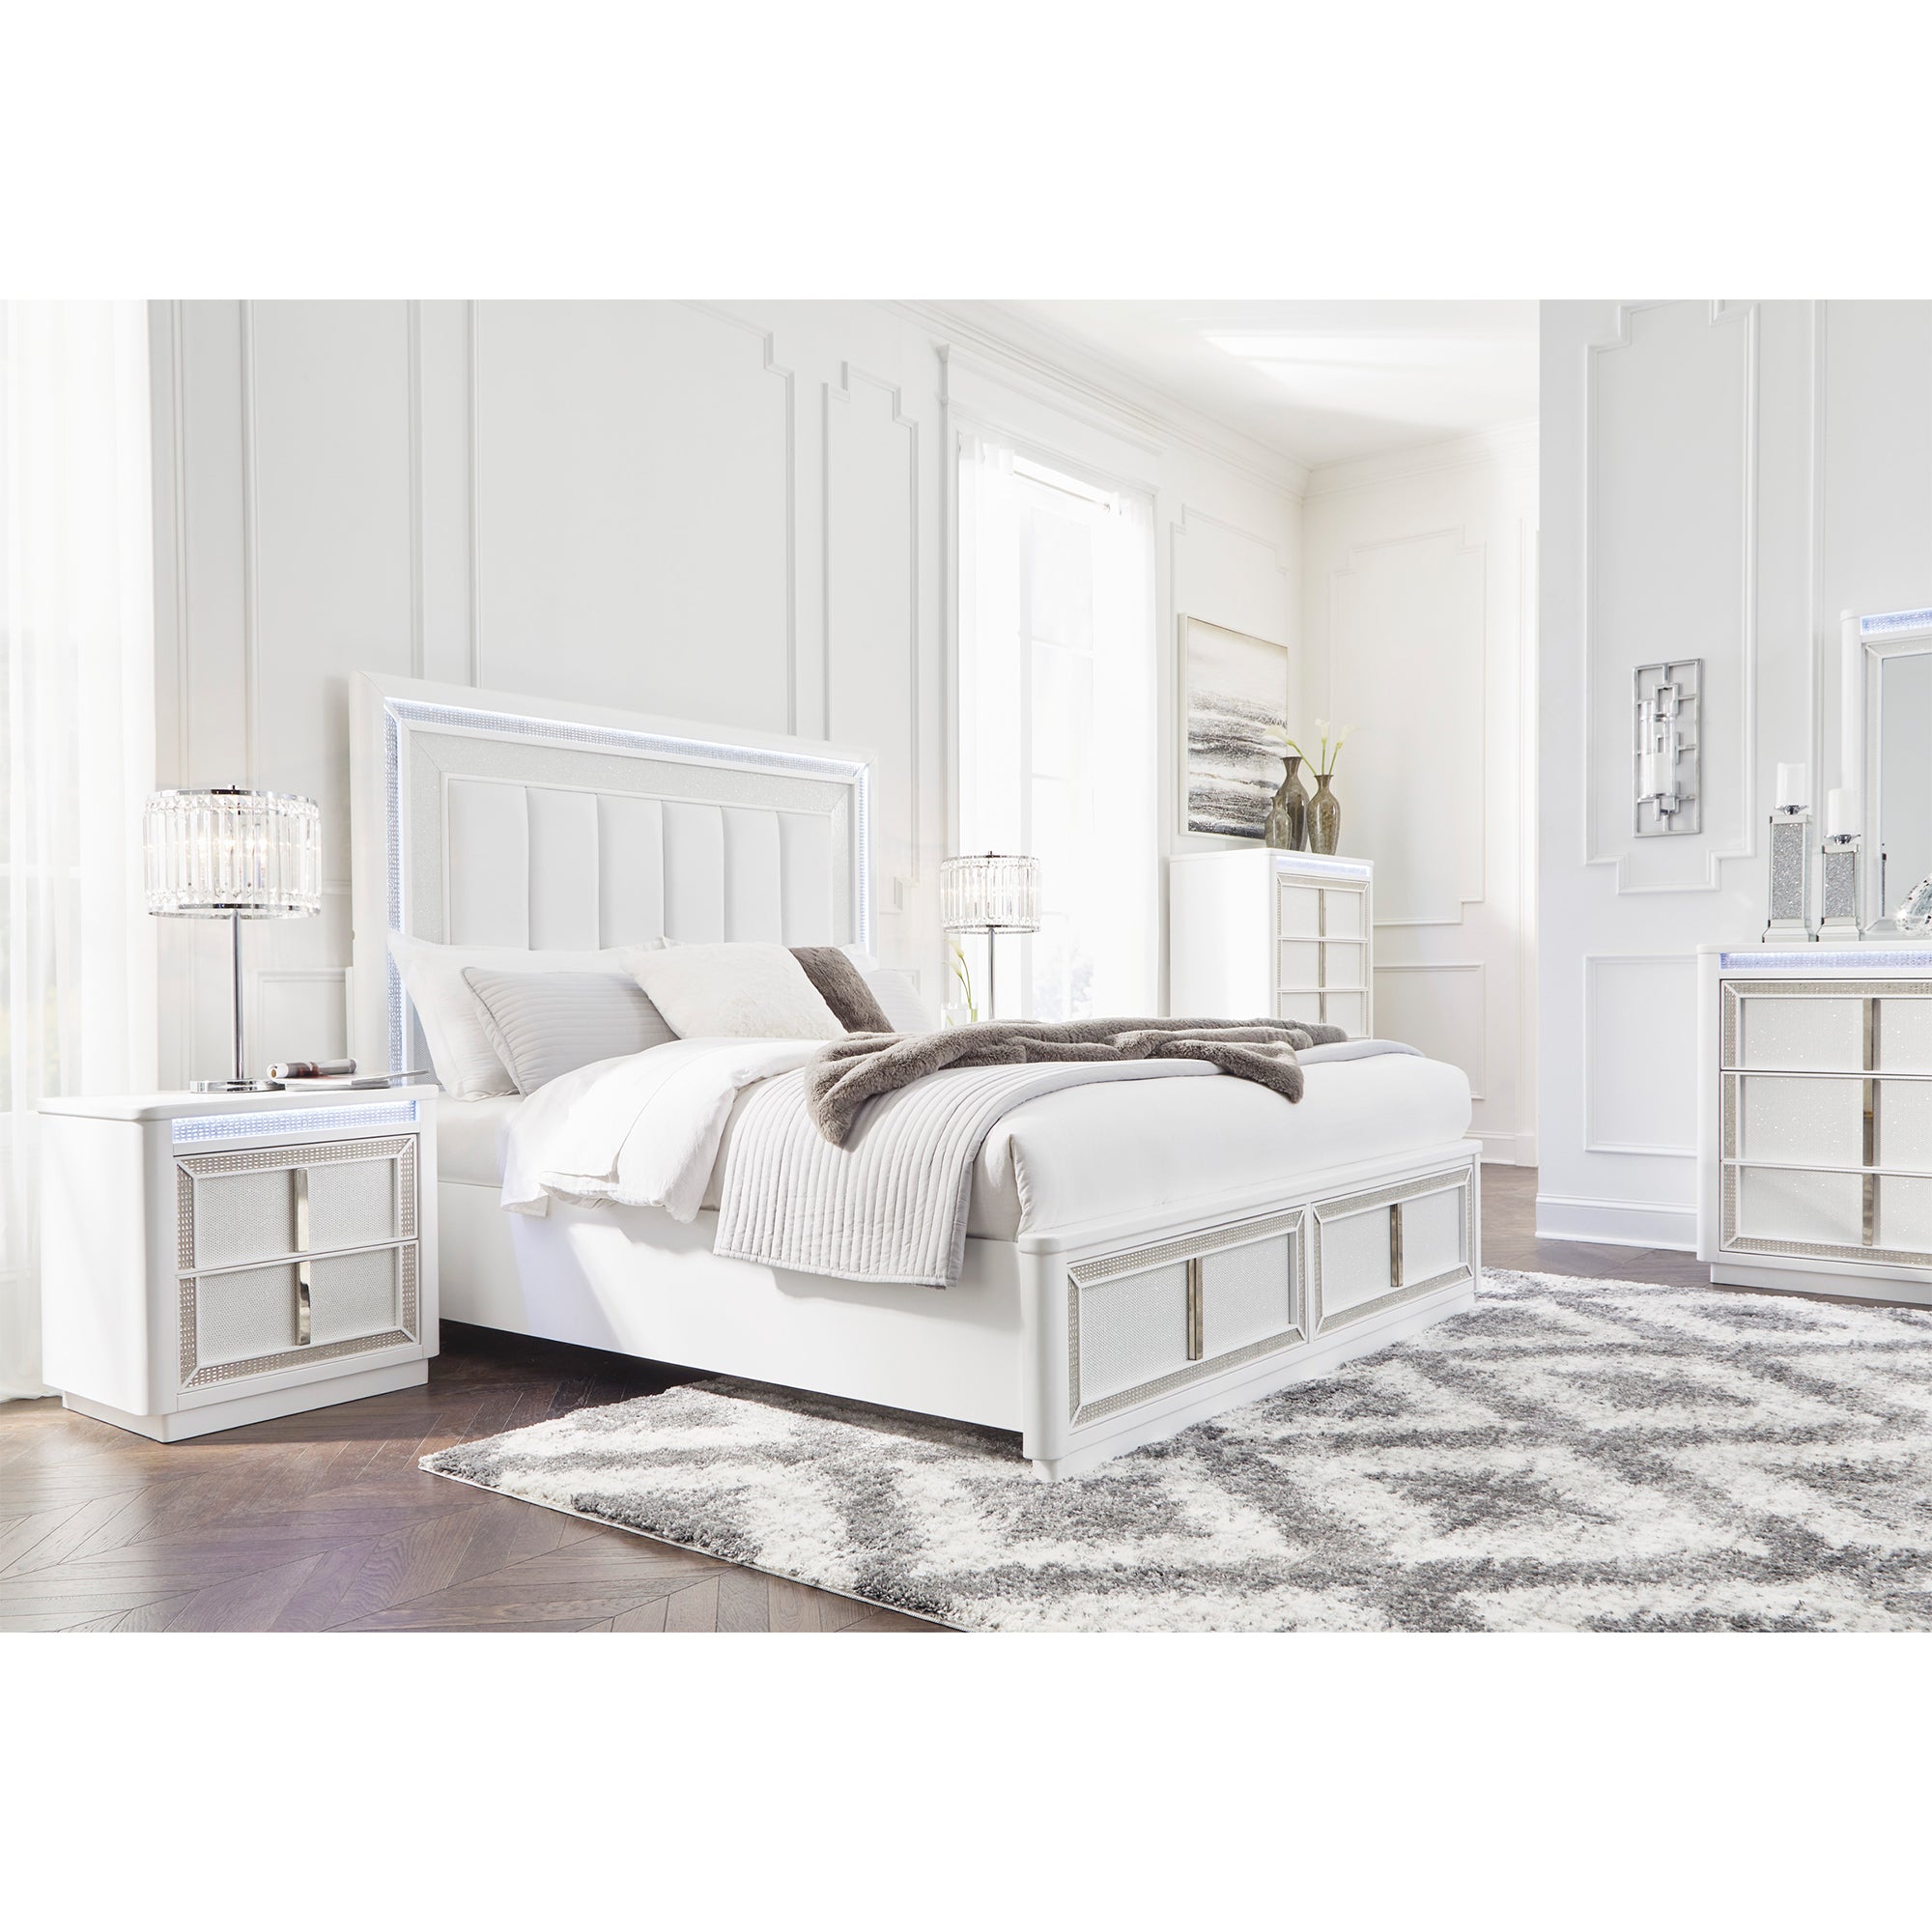 Chalanna Queen Upholstered Storage Bed